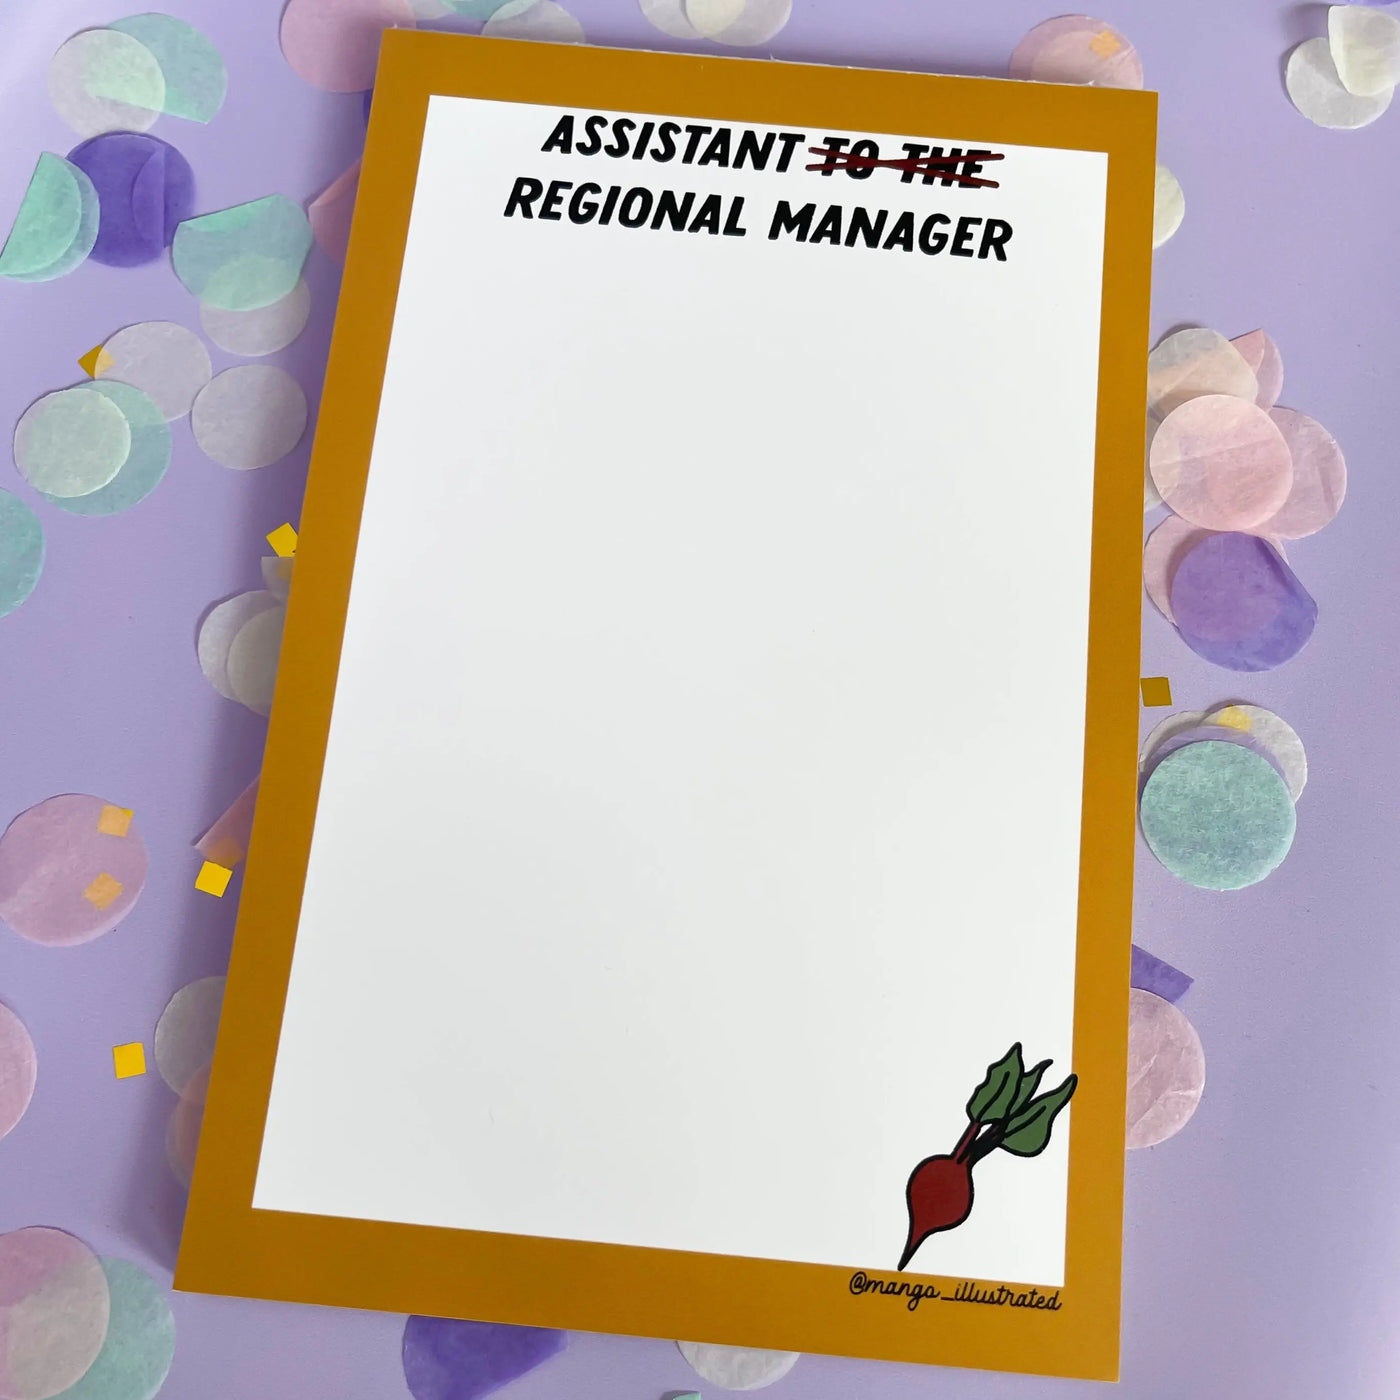 Assistant to the Regional Manager notepad MangoIllustrated